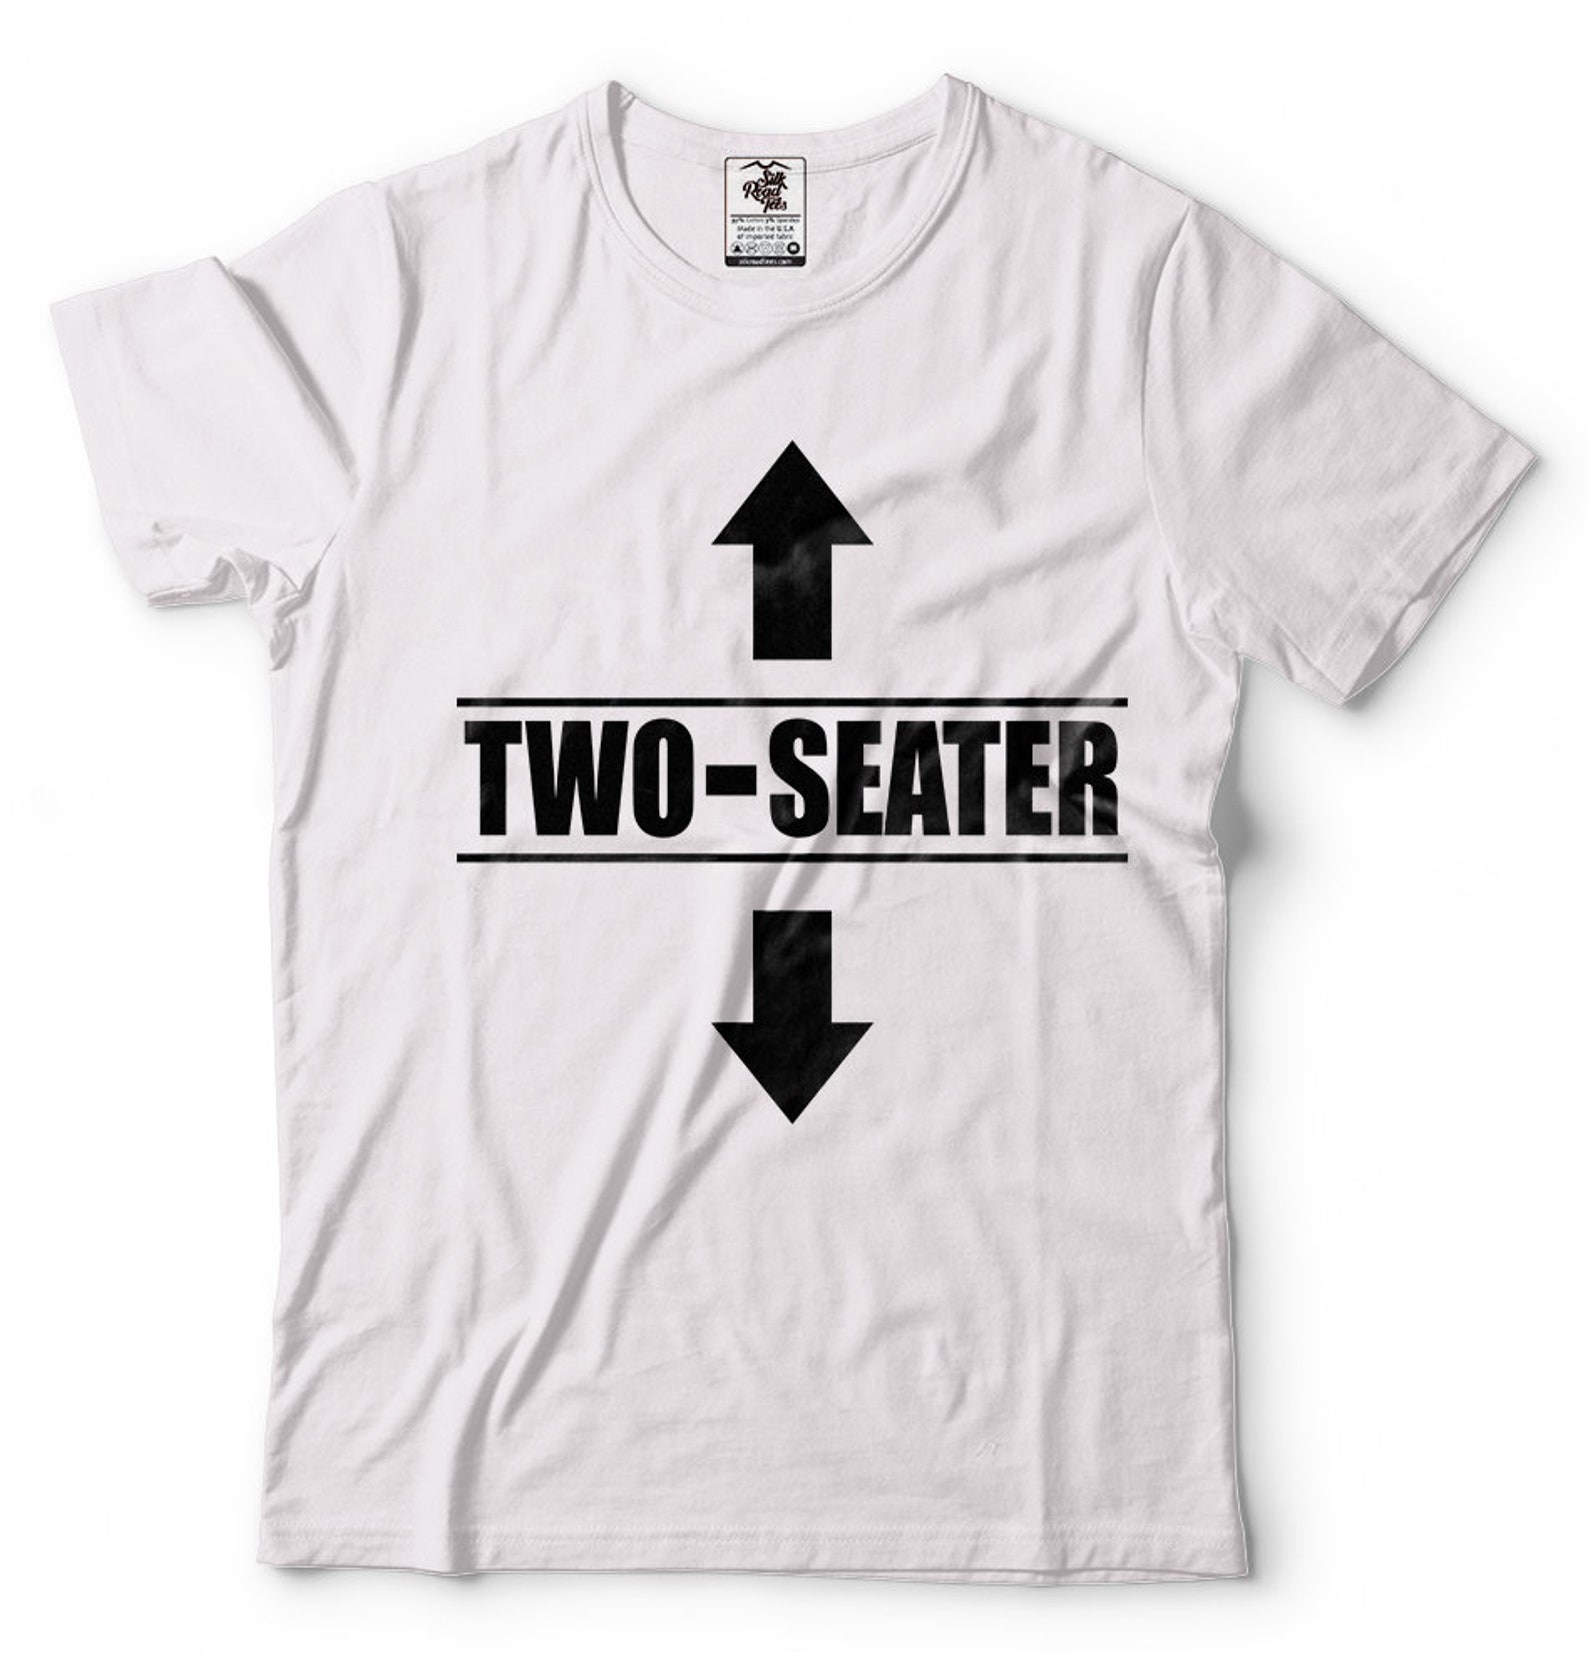 Two Seater Funny Shirt Mens Funny Shirt Two-seater Humor Tee - Etsy